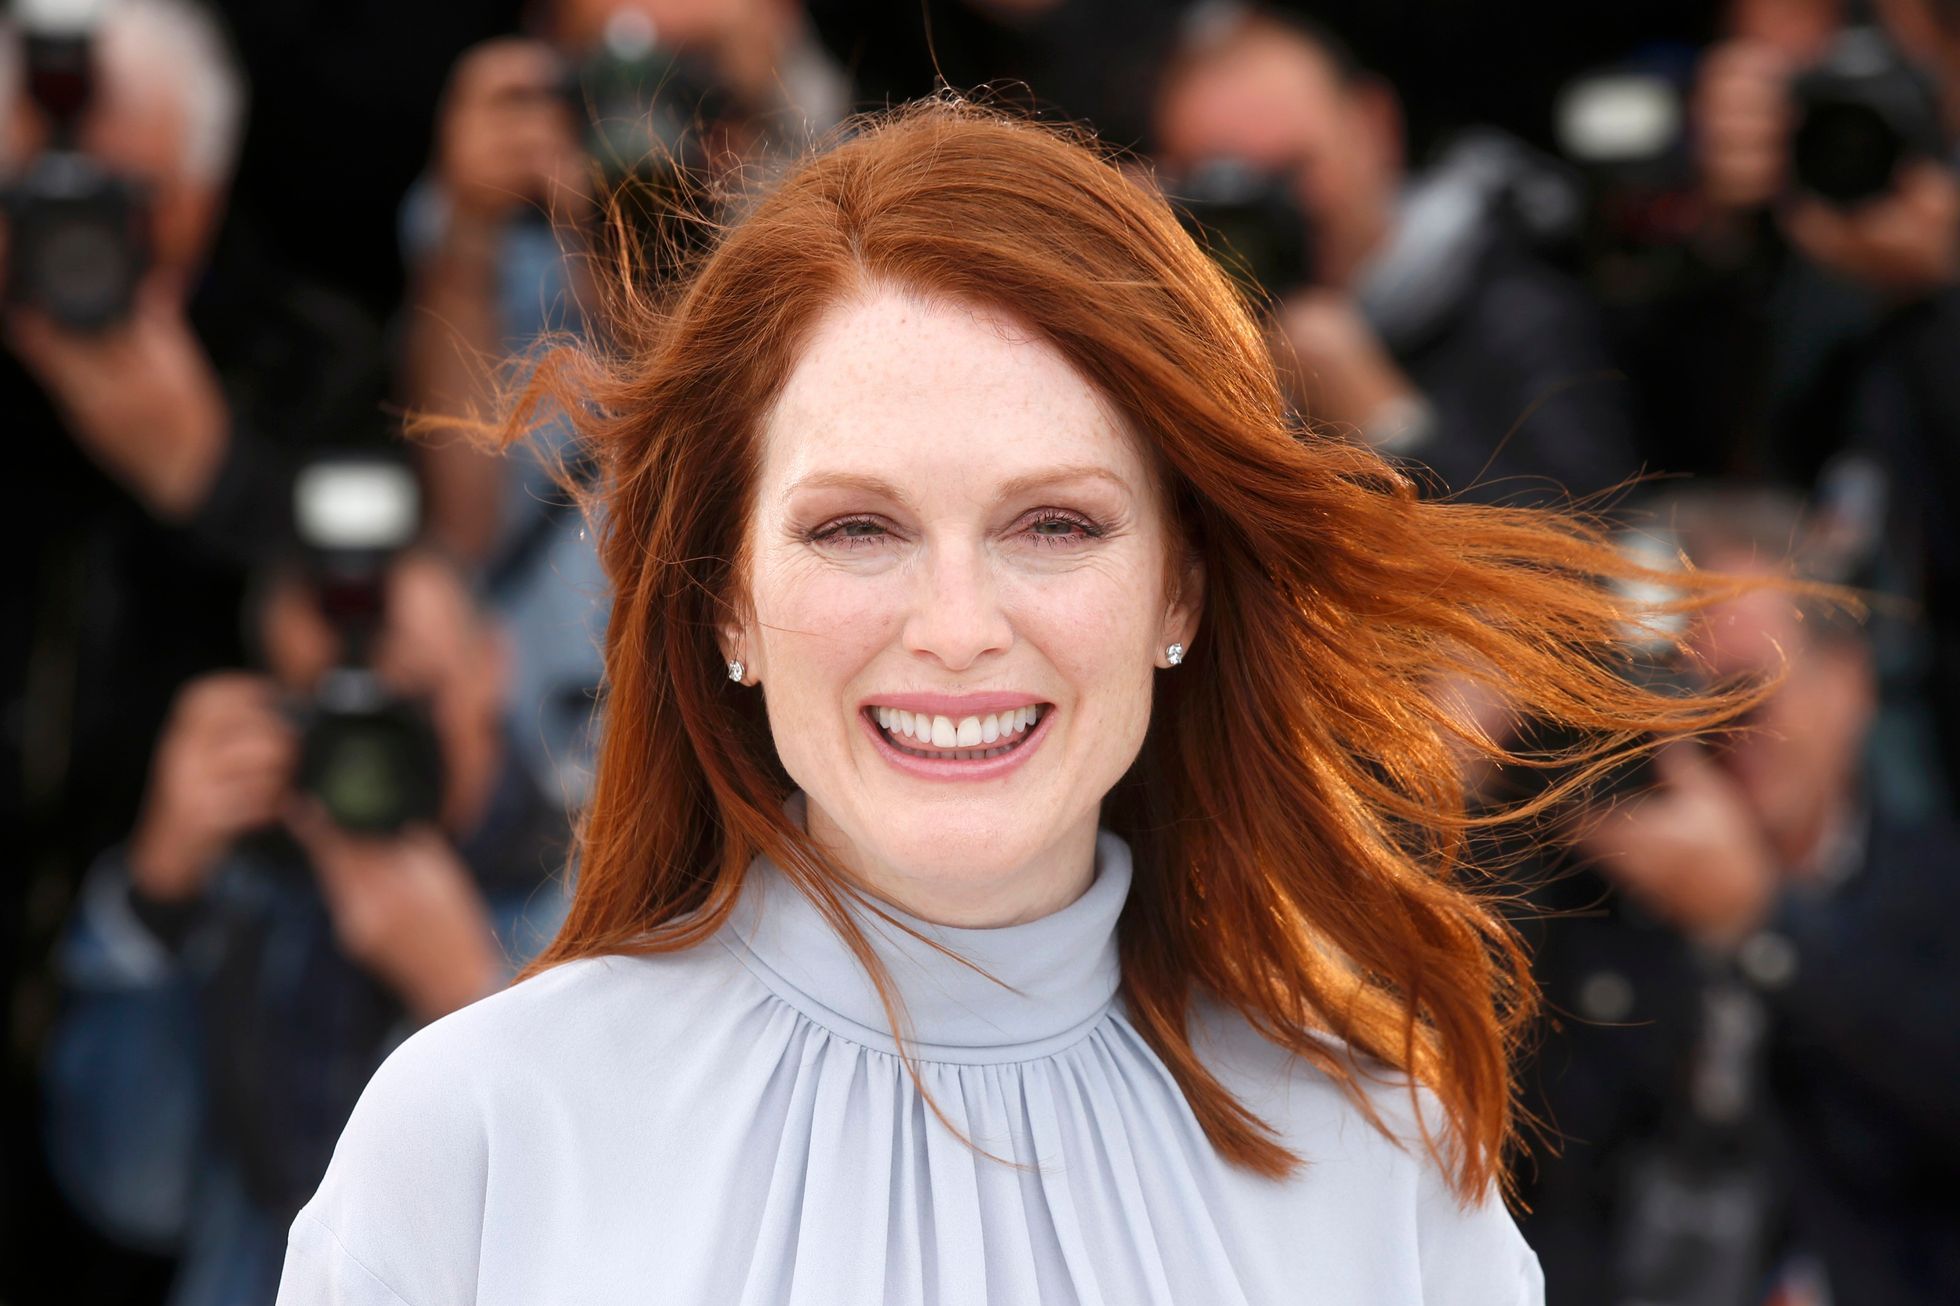 Cast member Julianne Moore poses during a photocall for the film &quot;Maps to the Stars&quot; in competition at the 67th Cannes Film Festival in Cannes